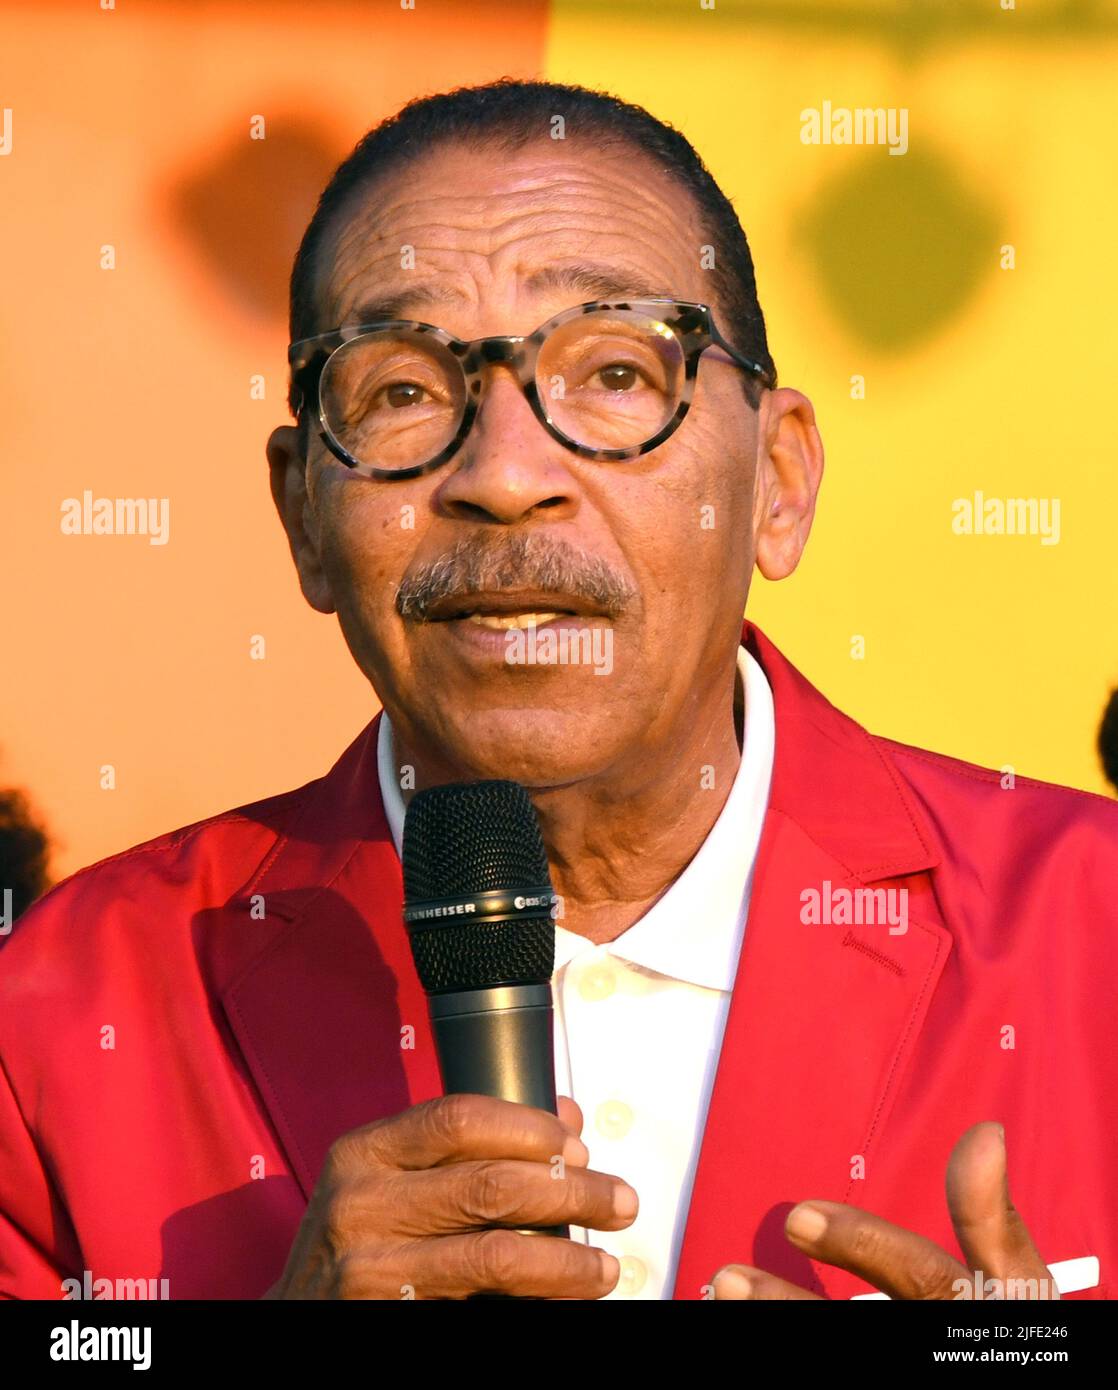 Los Angeles, USA. 01st July, 2022. Councilmen Herb Wesson attends the 2022 South LA Pride Community Picnic at the Norman O. Houston Park in Los Angeles, USAlifornia on July 1, 2022 Credit: Koi Sojer/Snap'n U Photos/Media Punch/Alamy Live News Stock Photo